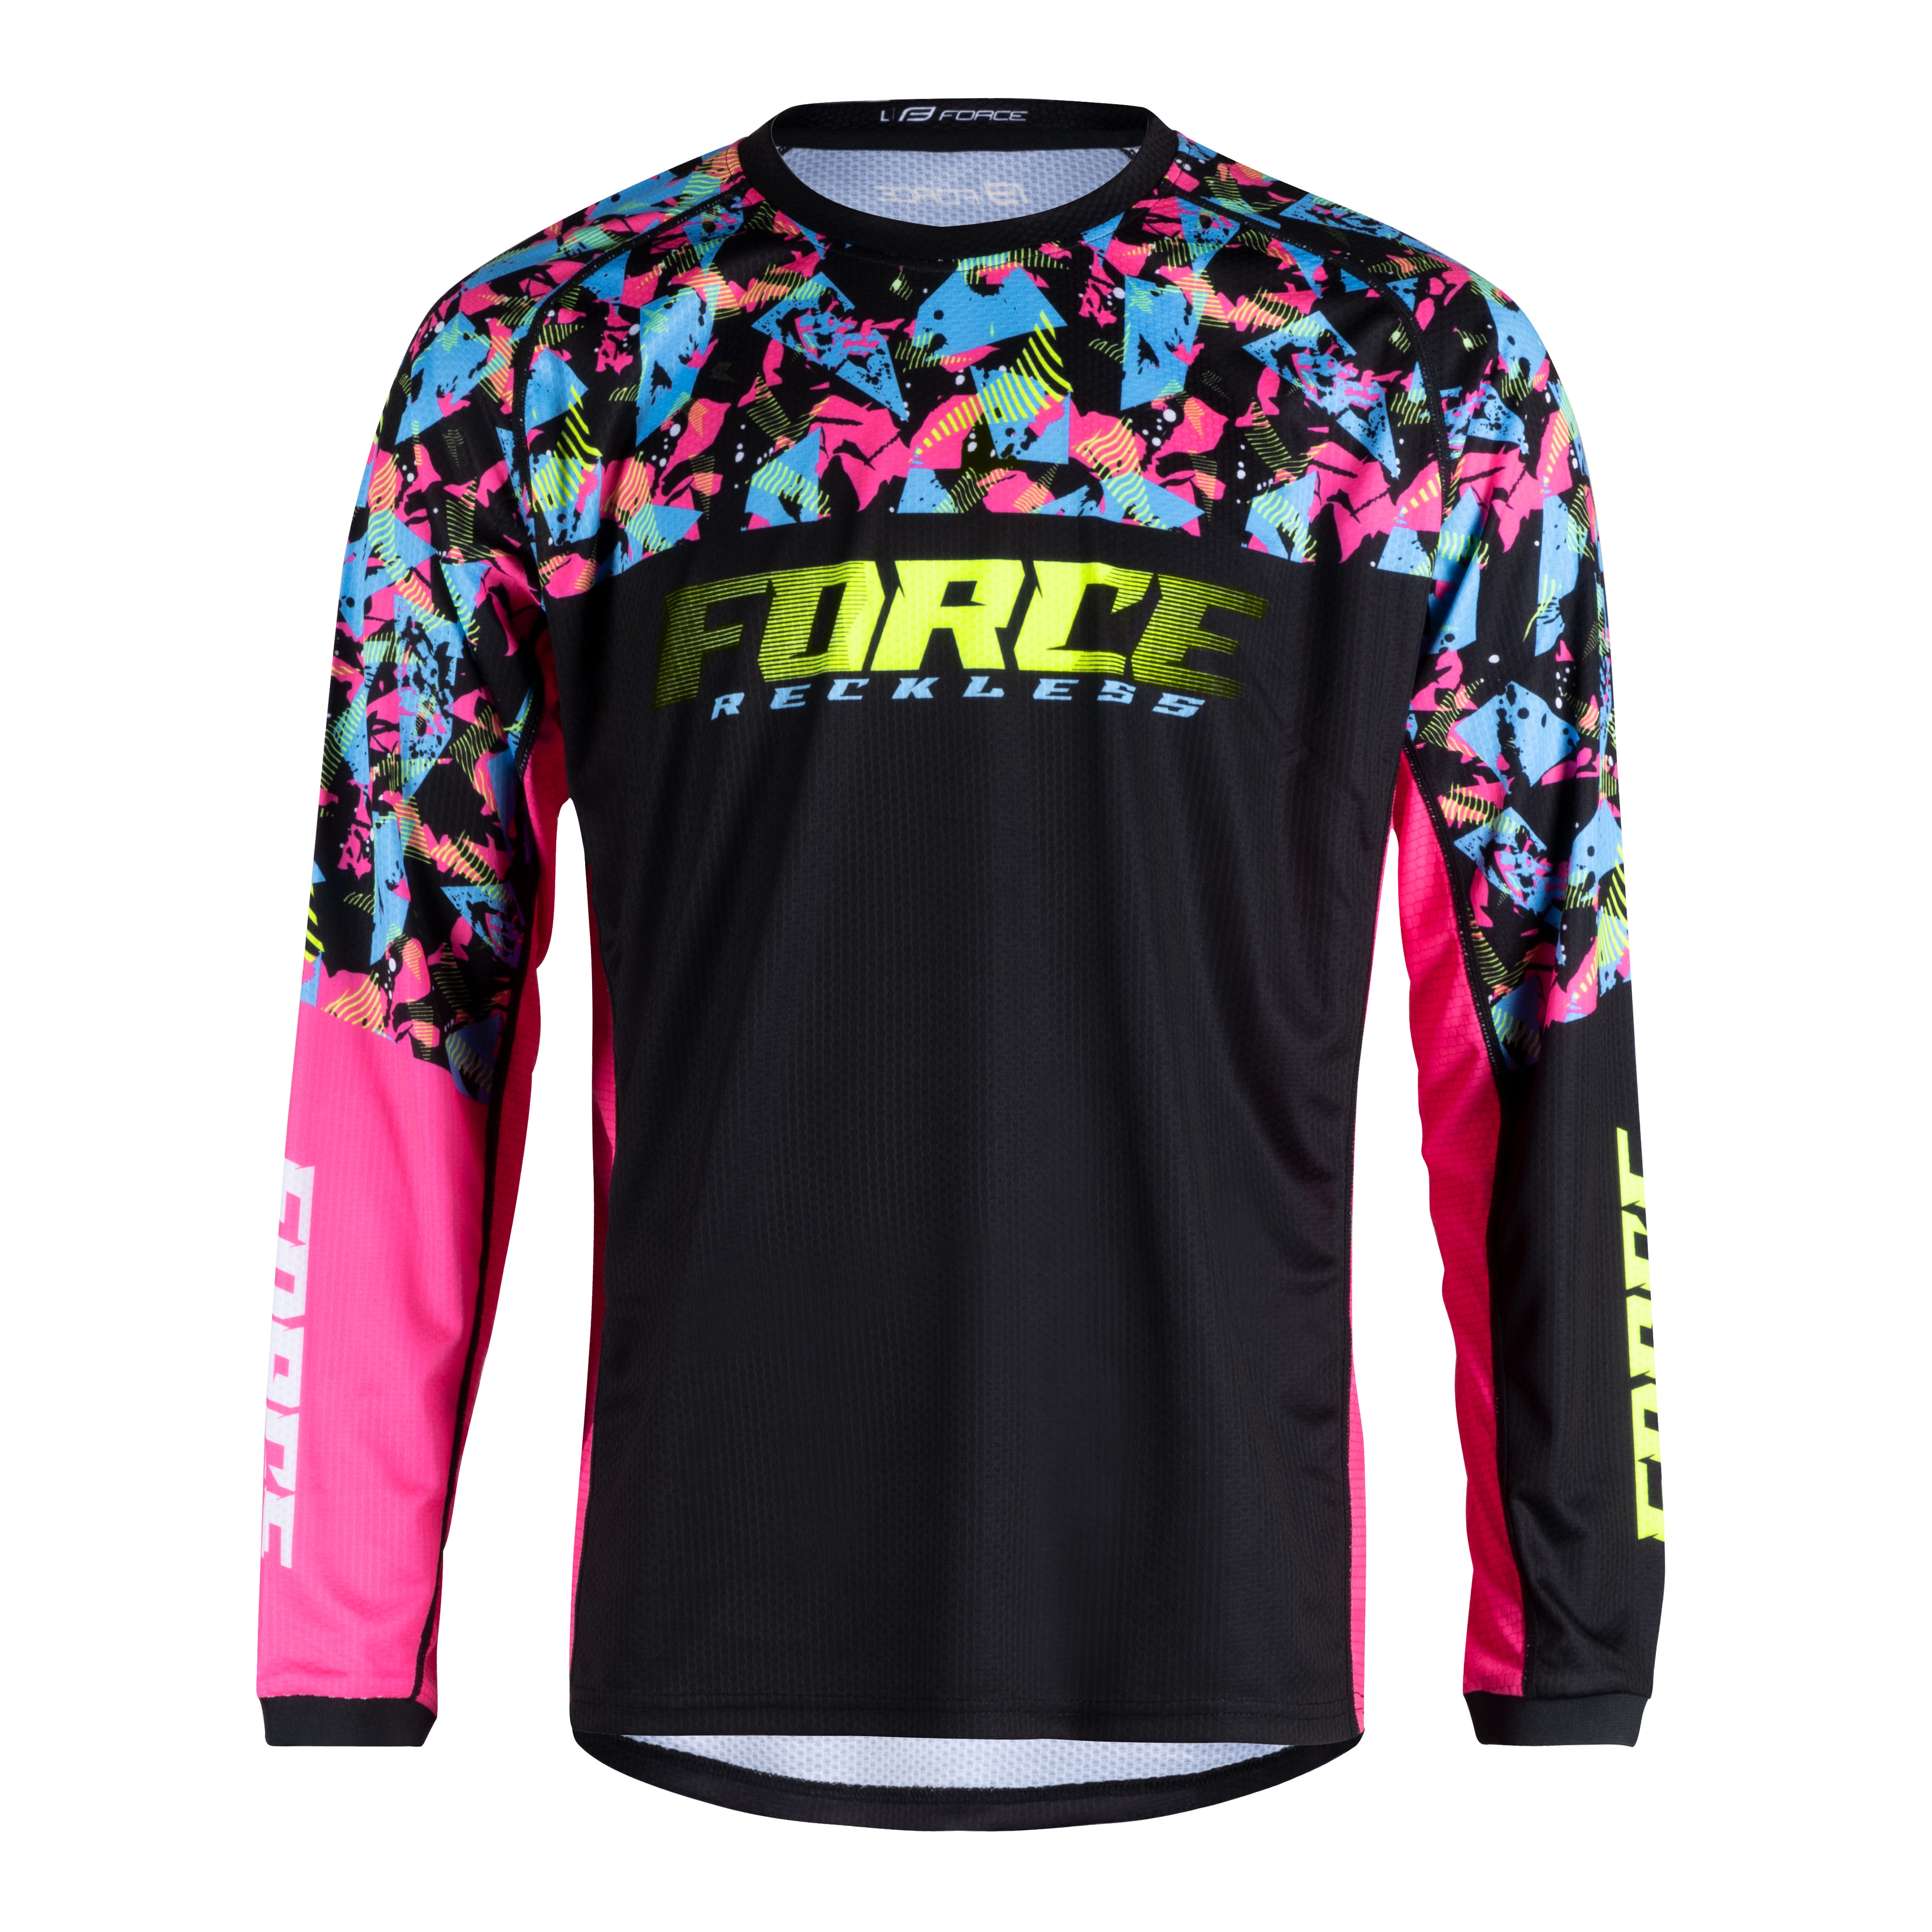 dres F RECKLESS dl. rukv, erno-rovo-fluo S